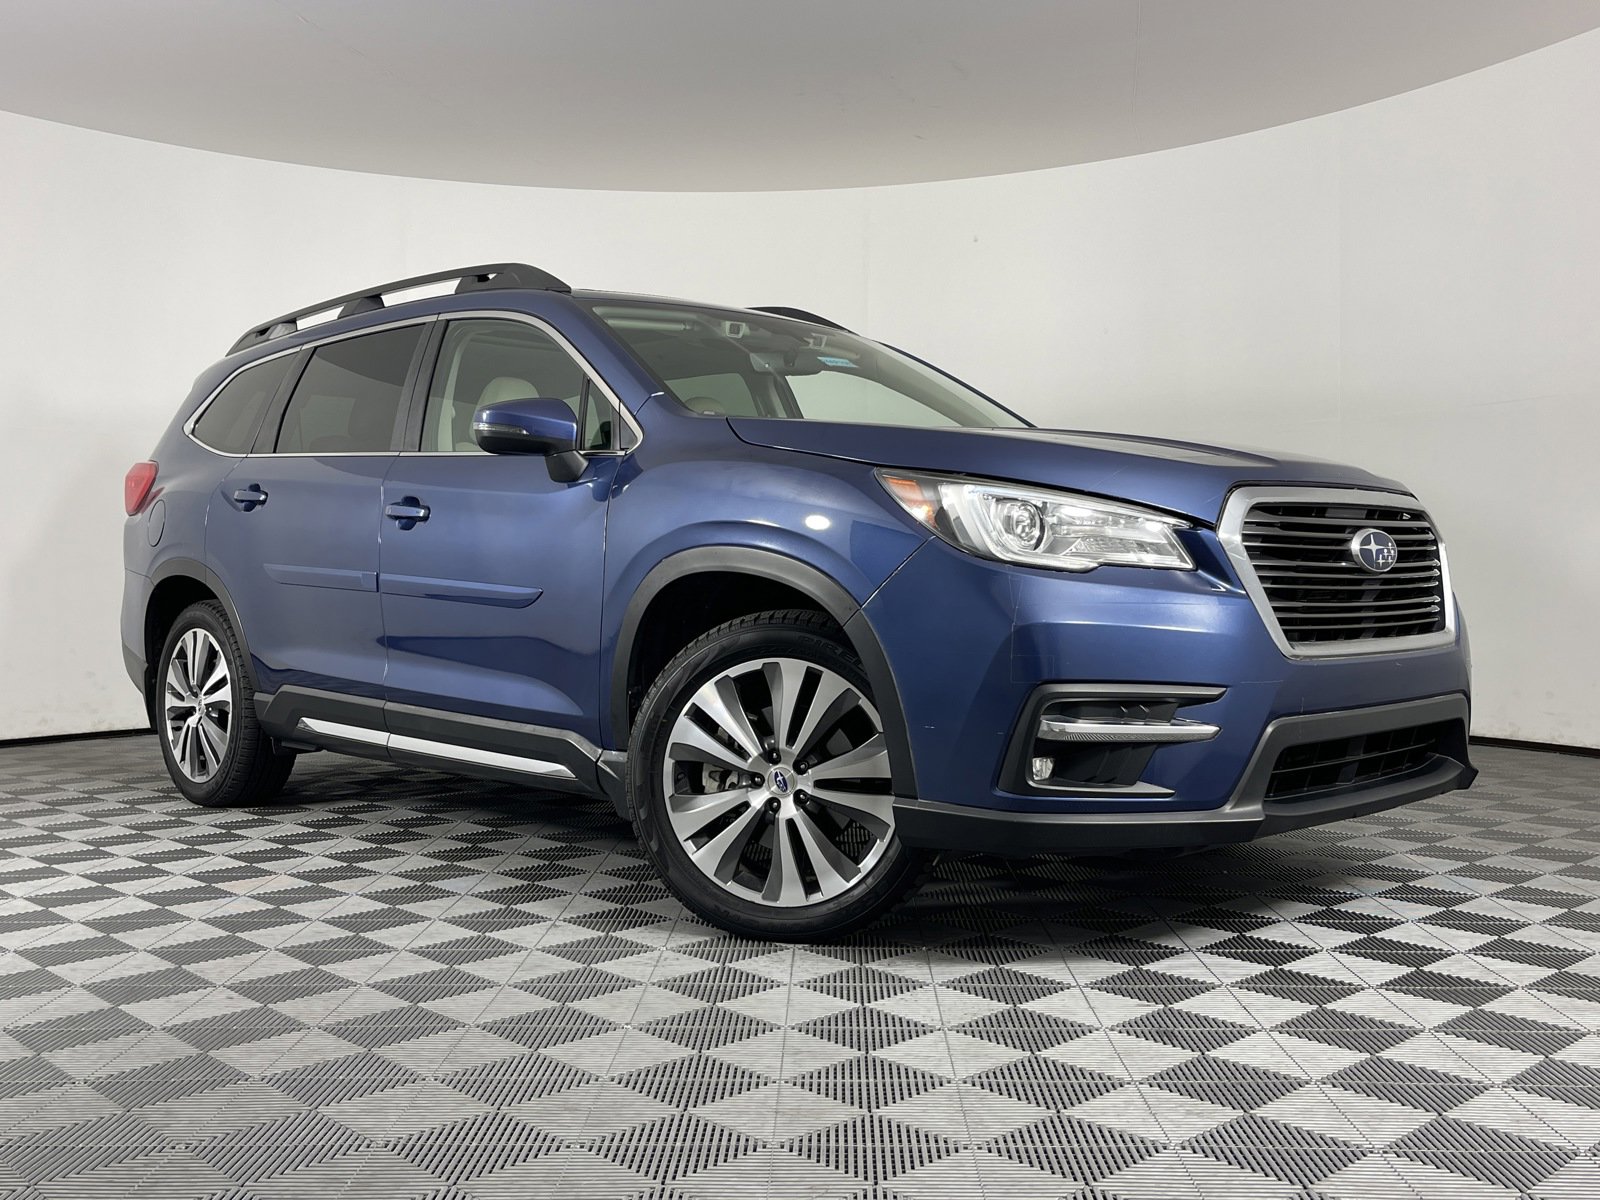 Used 2019 Subaru Ascent Limited with VIN 4S4WMAPD1K3401468 for sale in Fairfield, CA